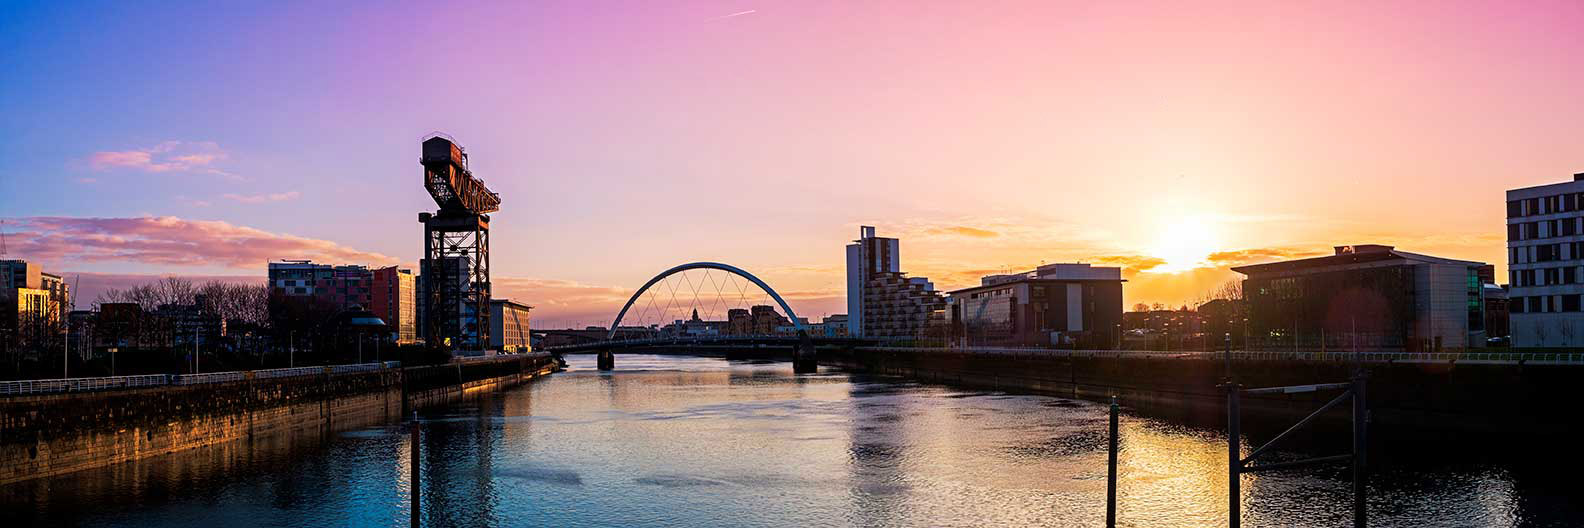 The Clyde Arc, Glasgow at sunset